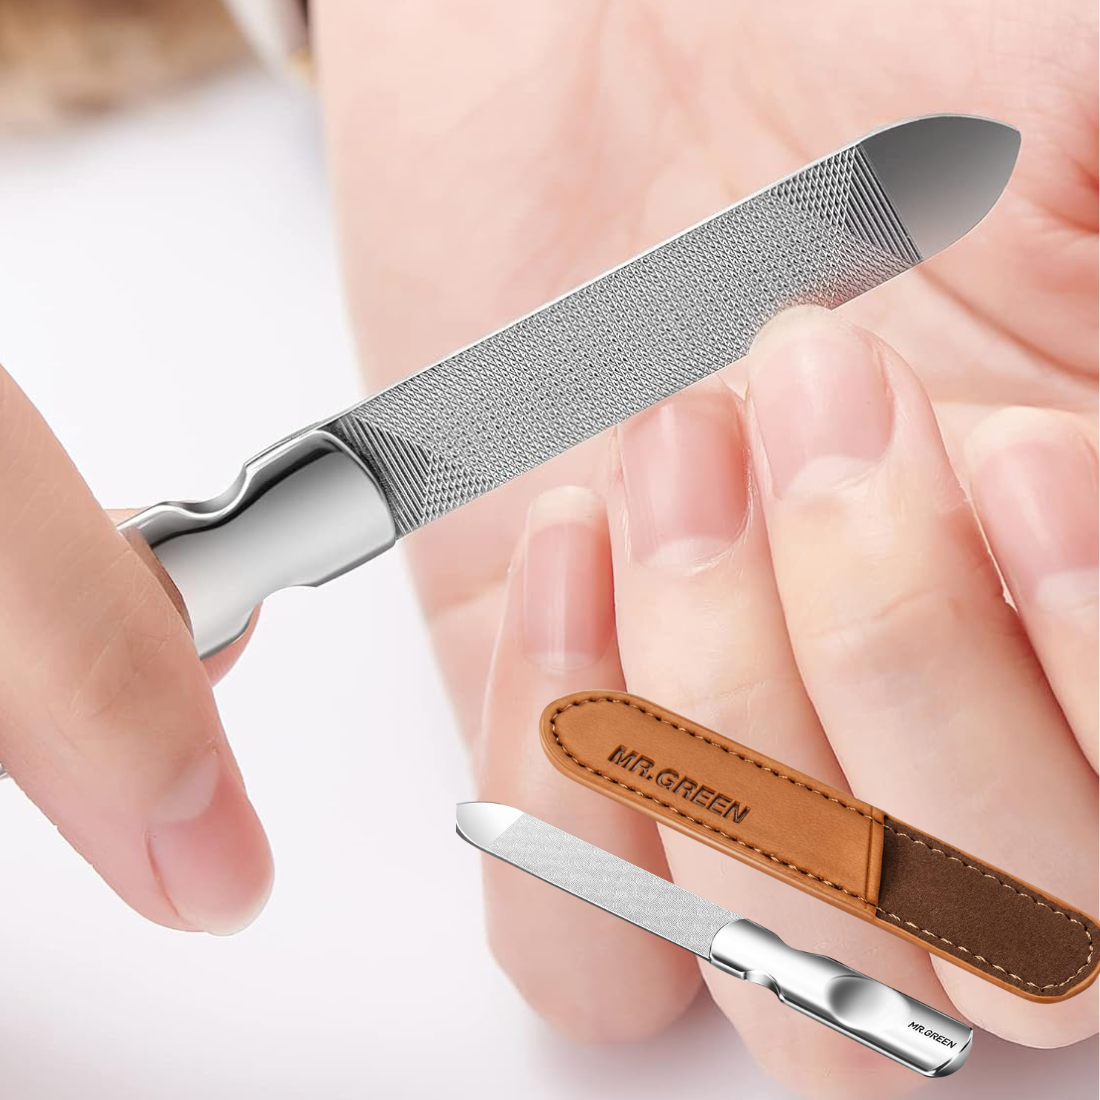 The Ultimate Guide to Metal Nail Files: 5 Top Products Reviewed